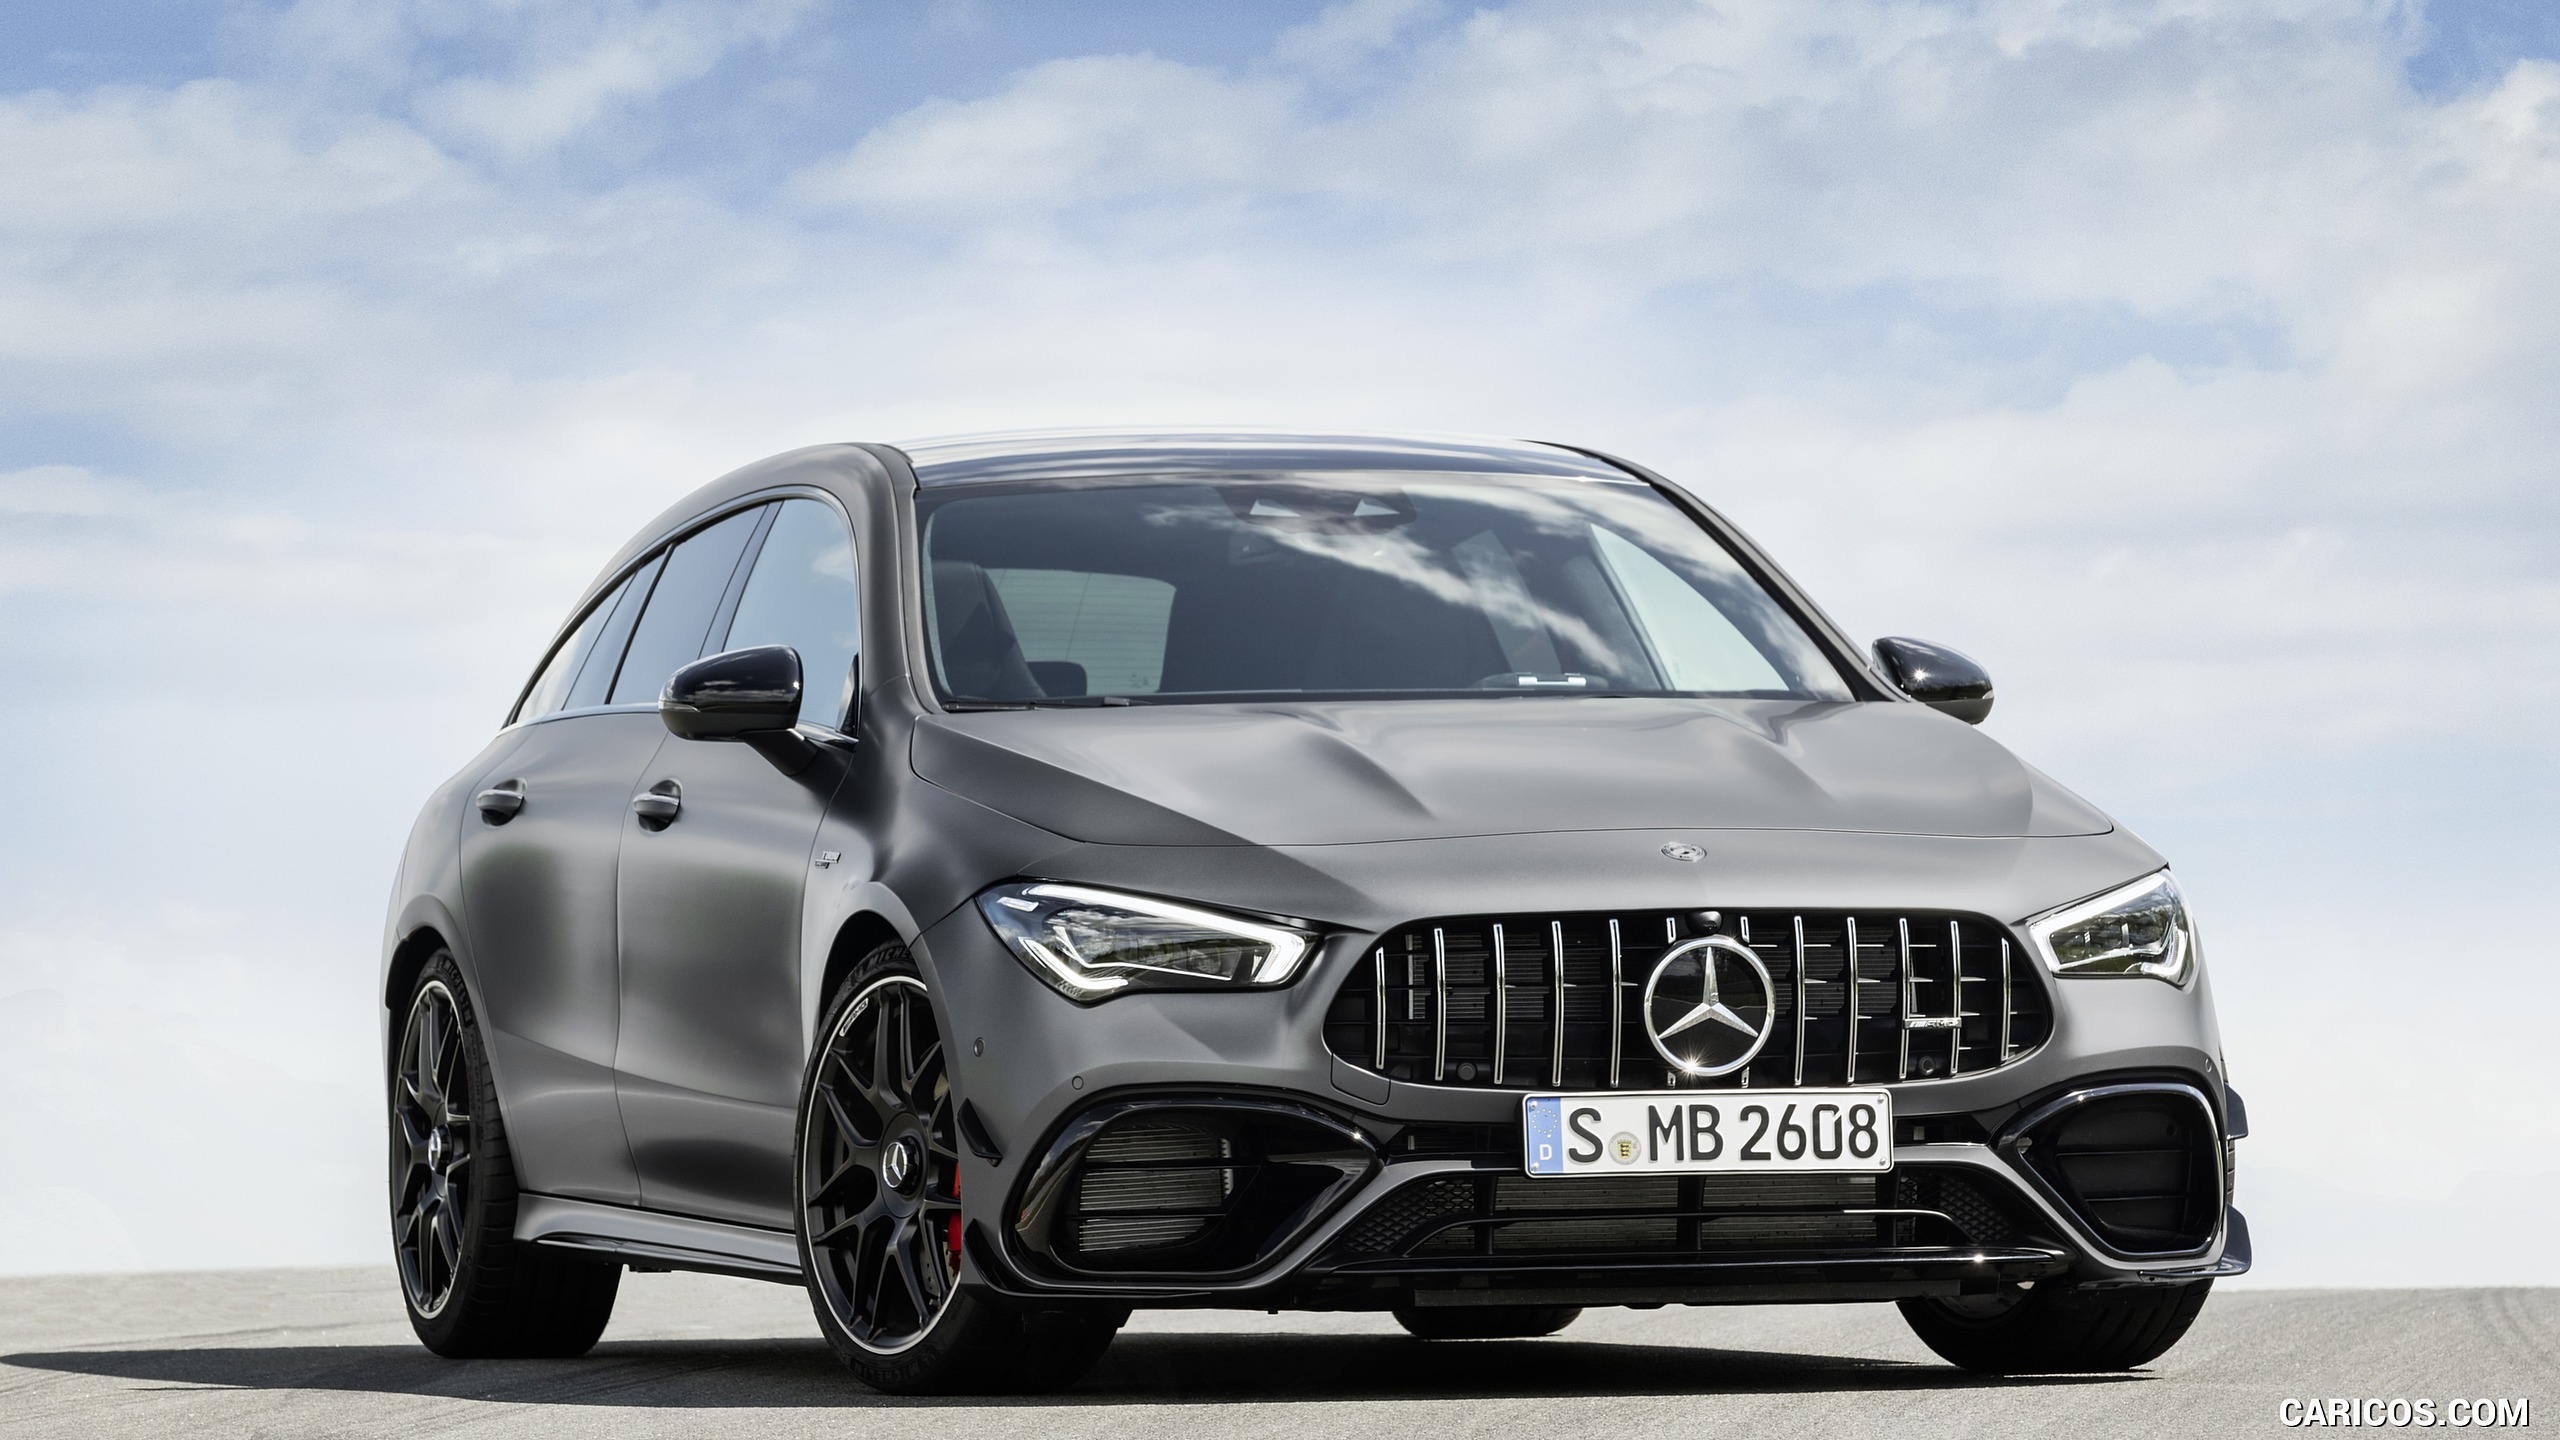 2020 Mercedes-AMG CLA 45 S 4MATIC+ Shooting Brake - Front Three-Quarter, #15 of 35